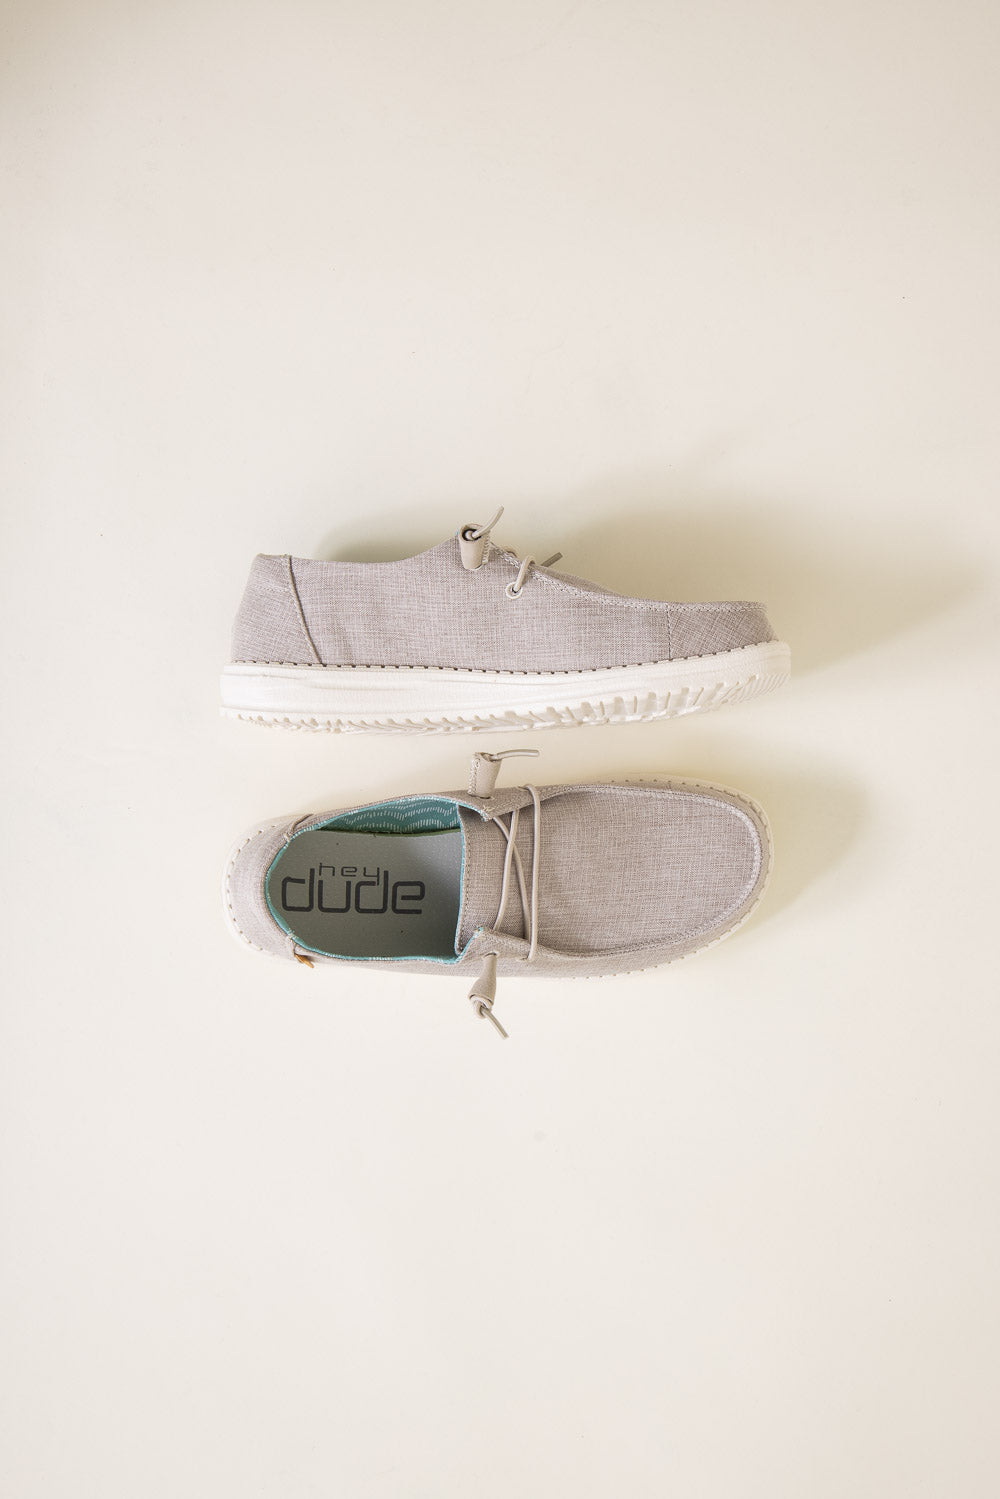 Hey Dude Girls' Wendy Linen Casual Shoes